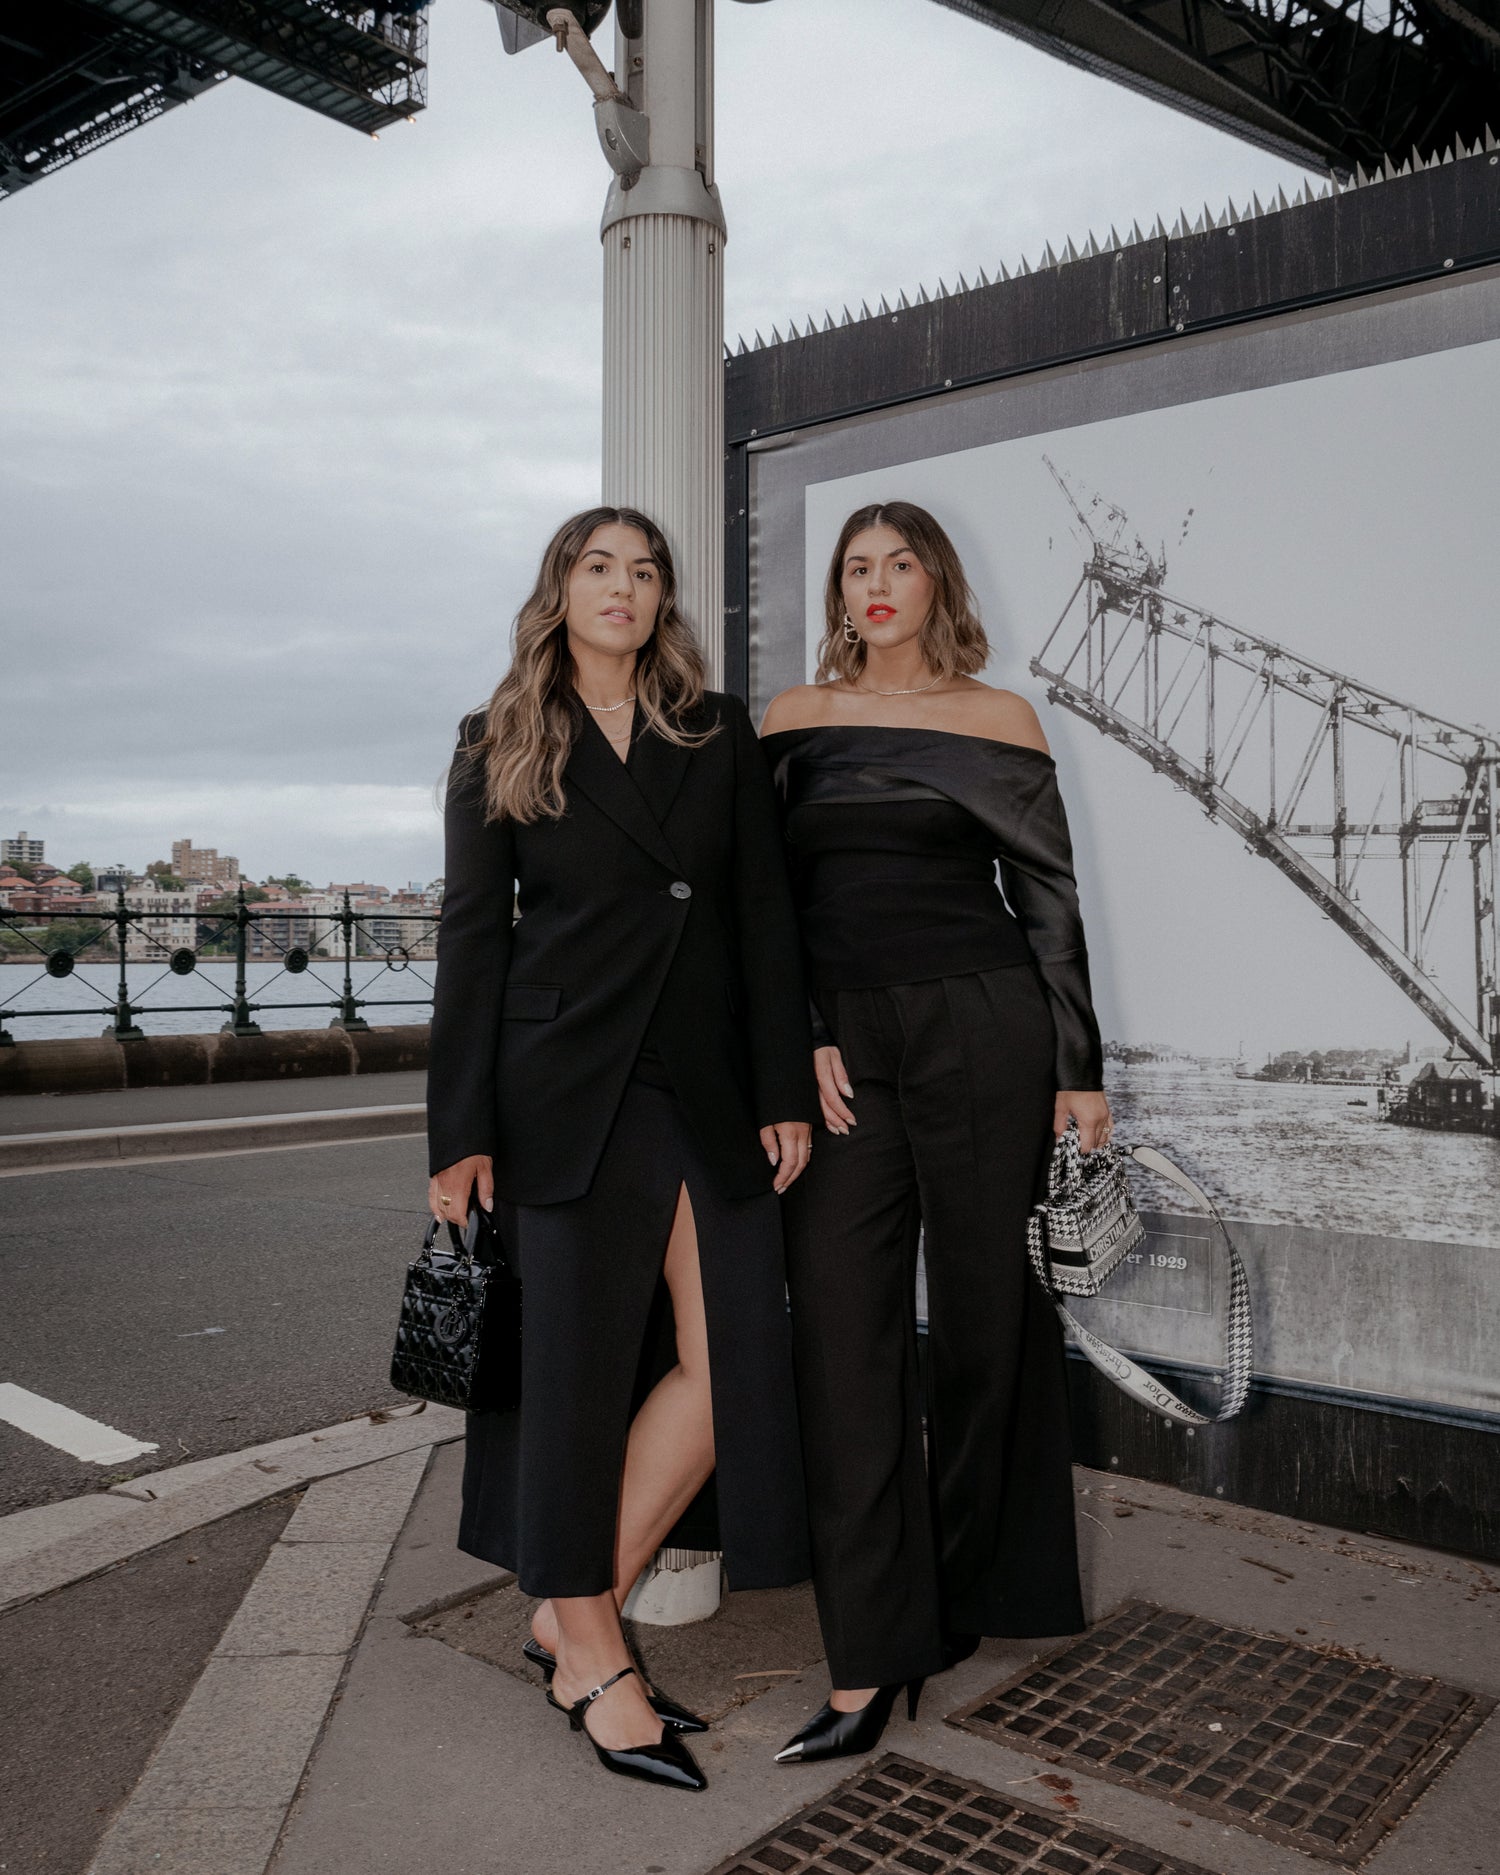 Identical twin sisters standing underneath the Sydney Harbour Bridge both wearing all black minimalist outfits staring directly at the camera. Both holding Lady Dior handbags